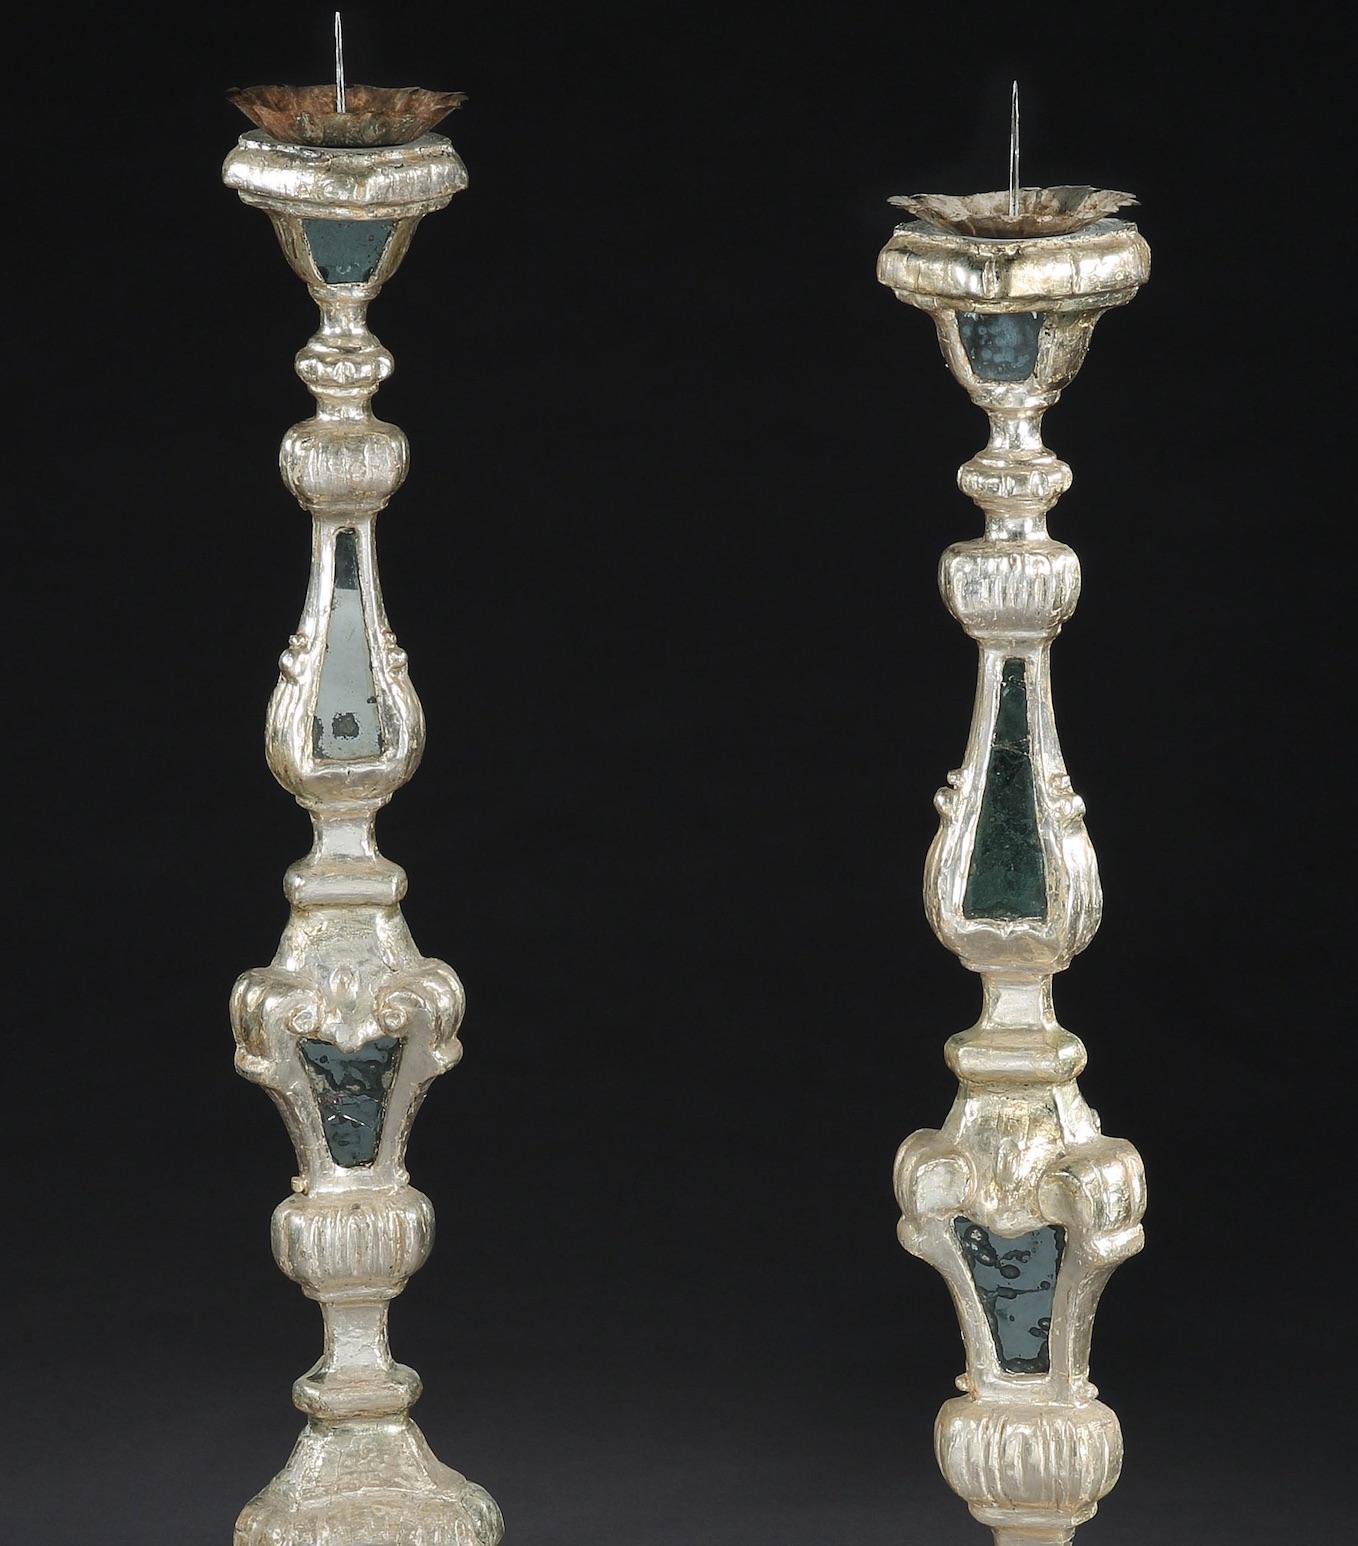 18th Century Torcheres Candlestands Pair Silver-Gilt Mirror Plate Italian Rococo 62